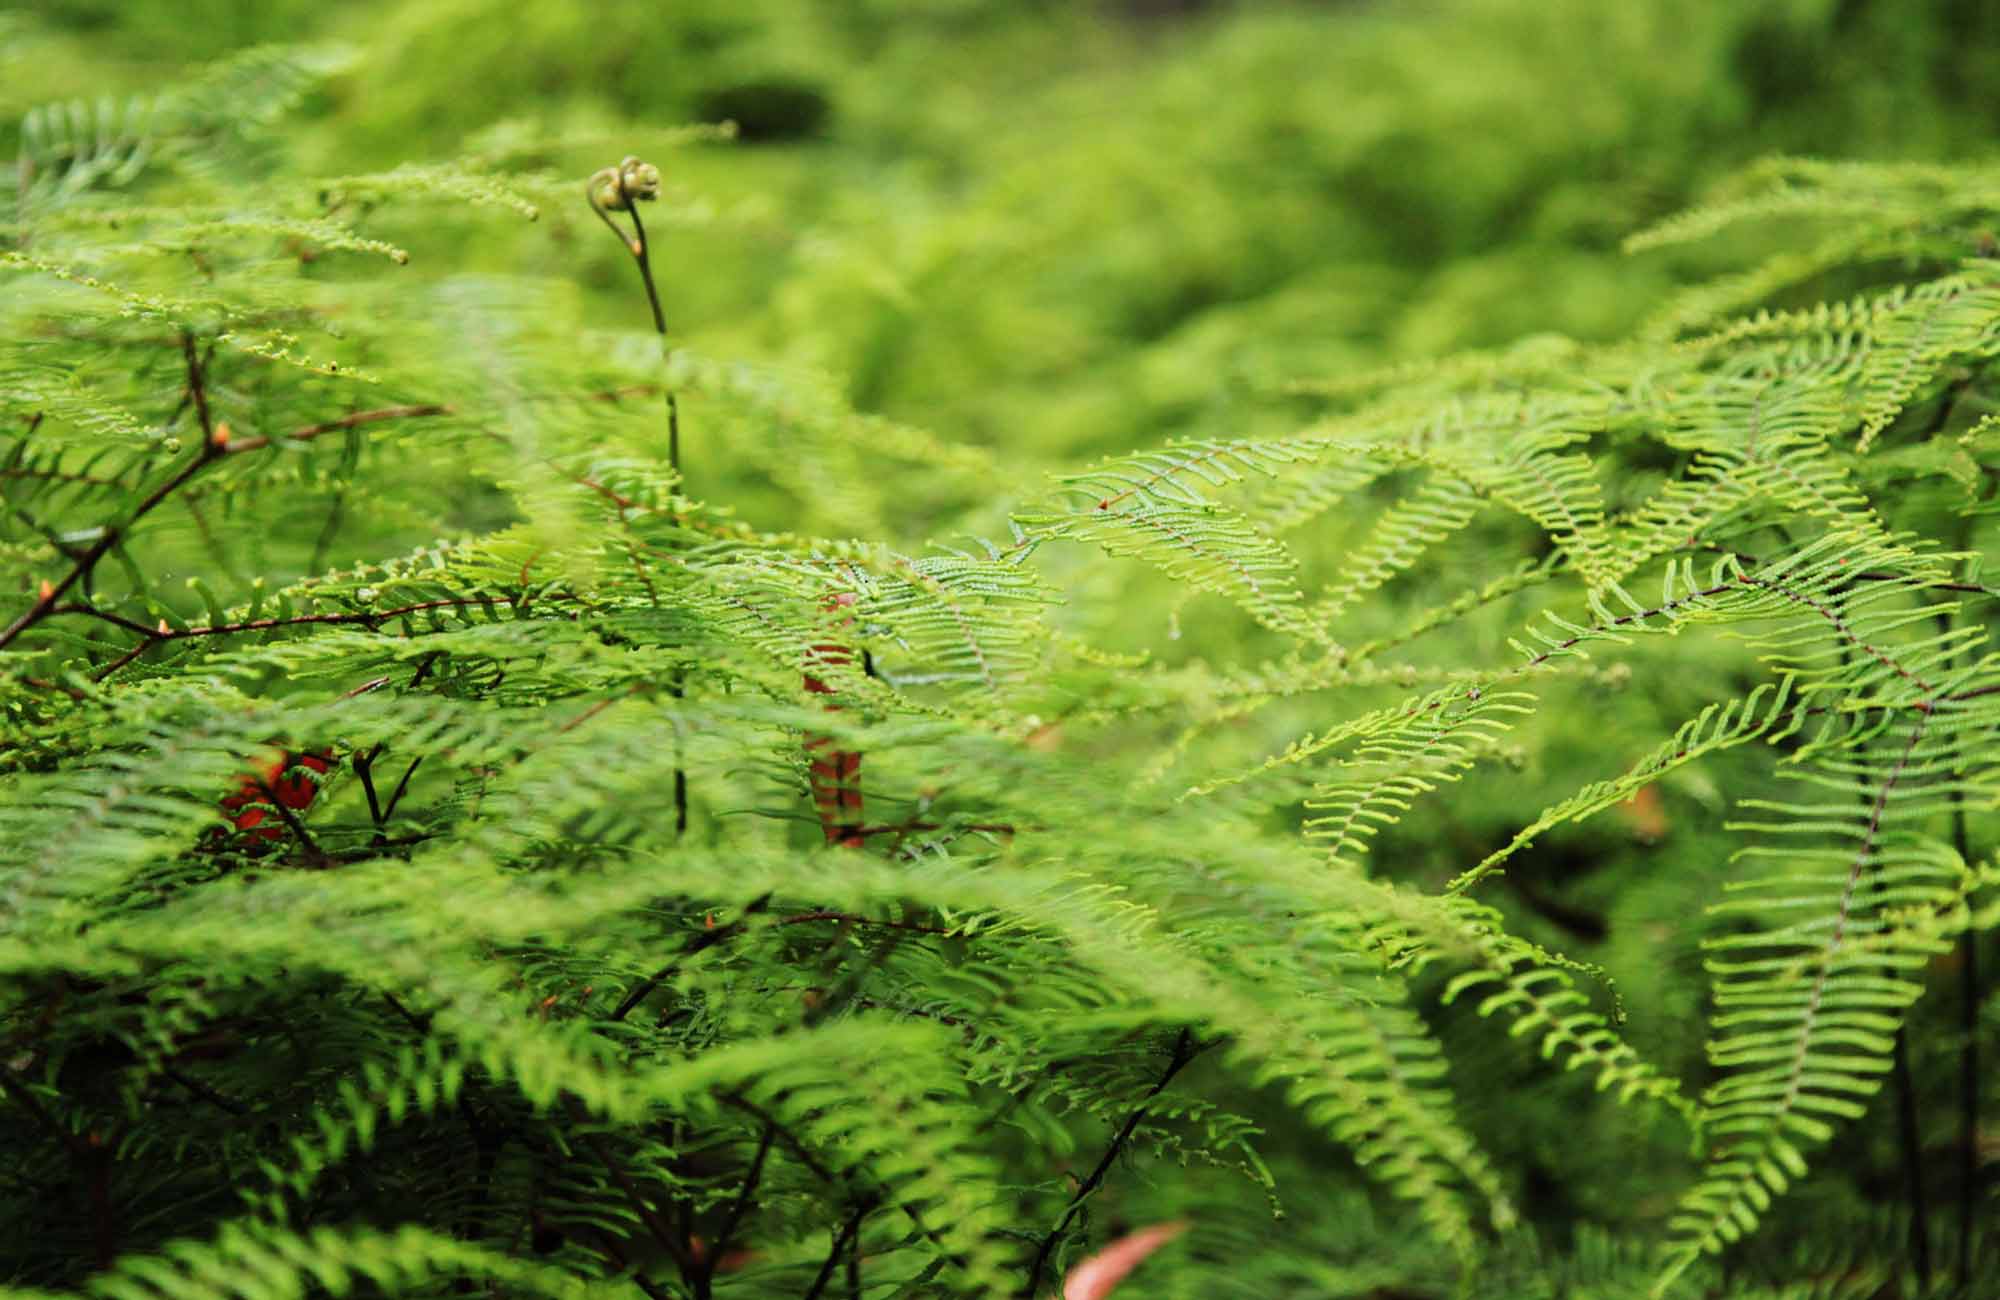 Ferns in Budderoo National Park. Photo: Andy Richards